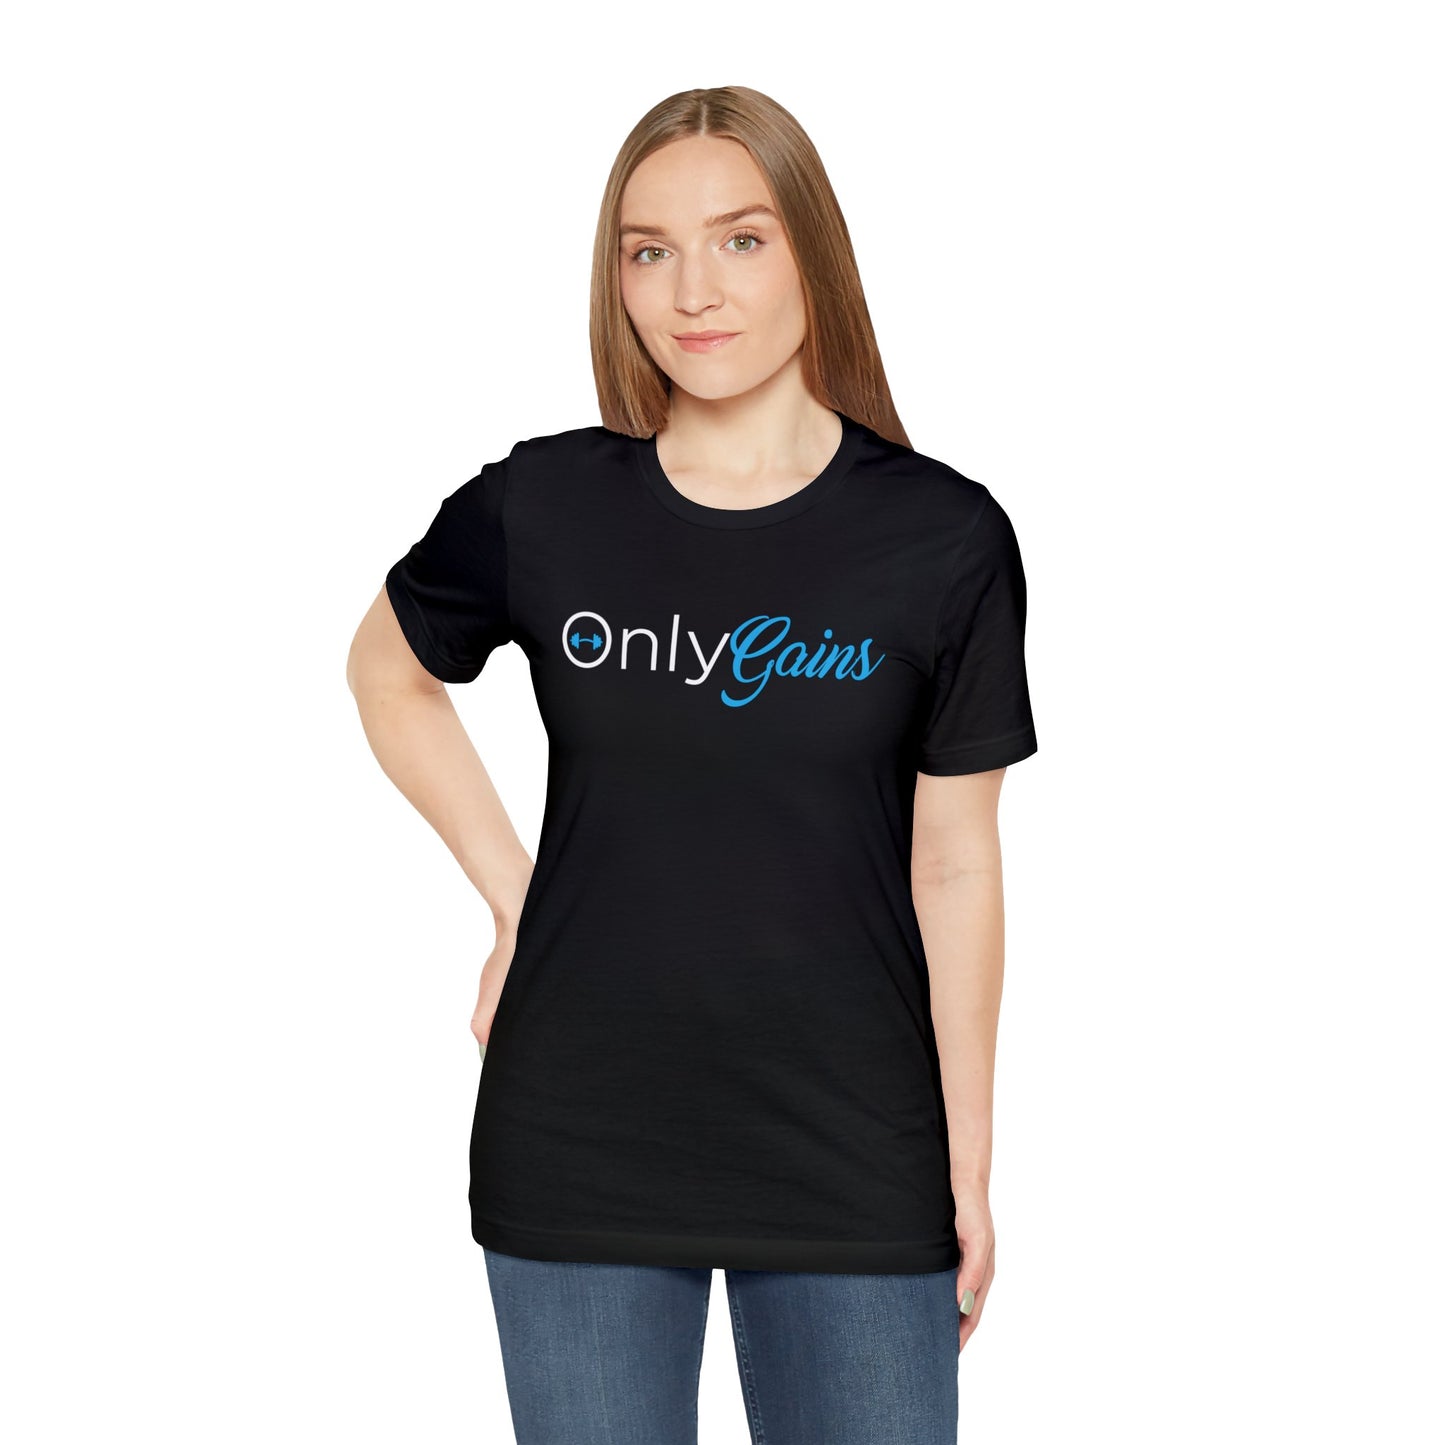 OnlyGains Tee